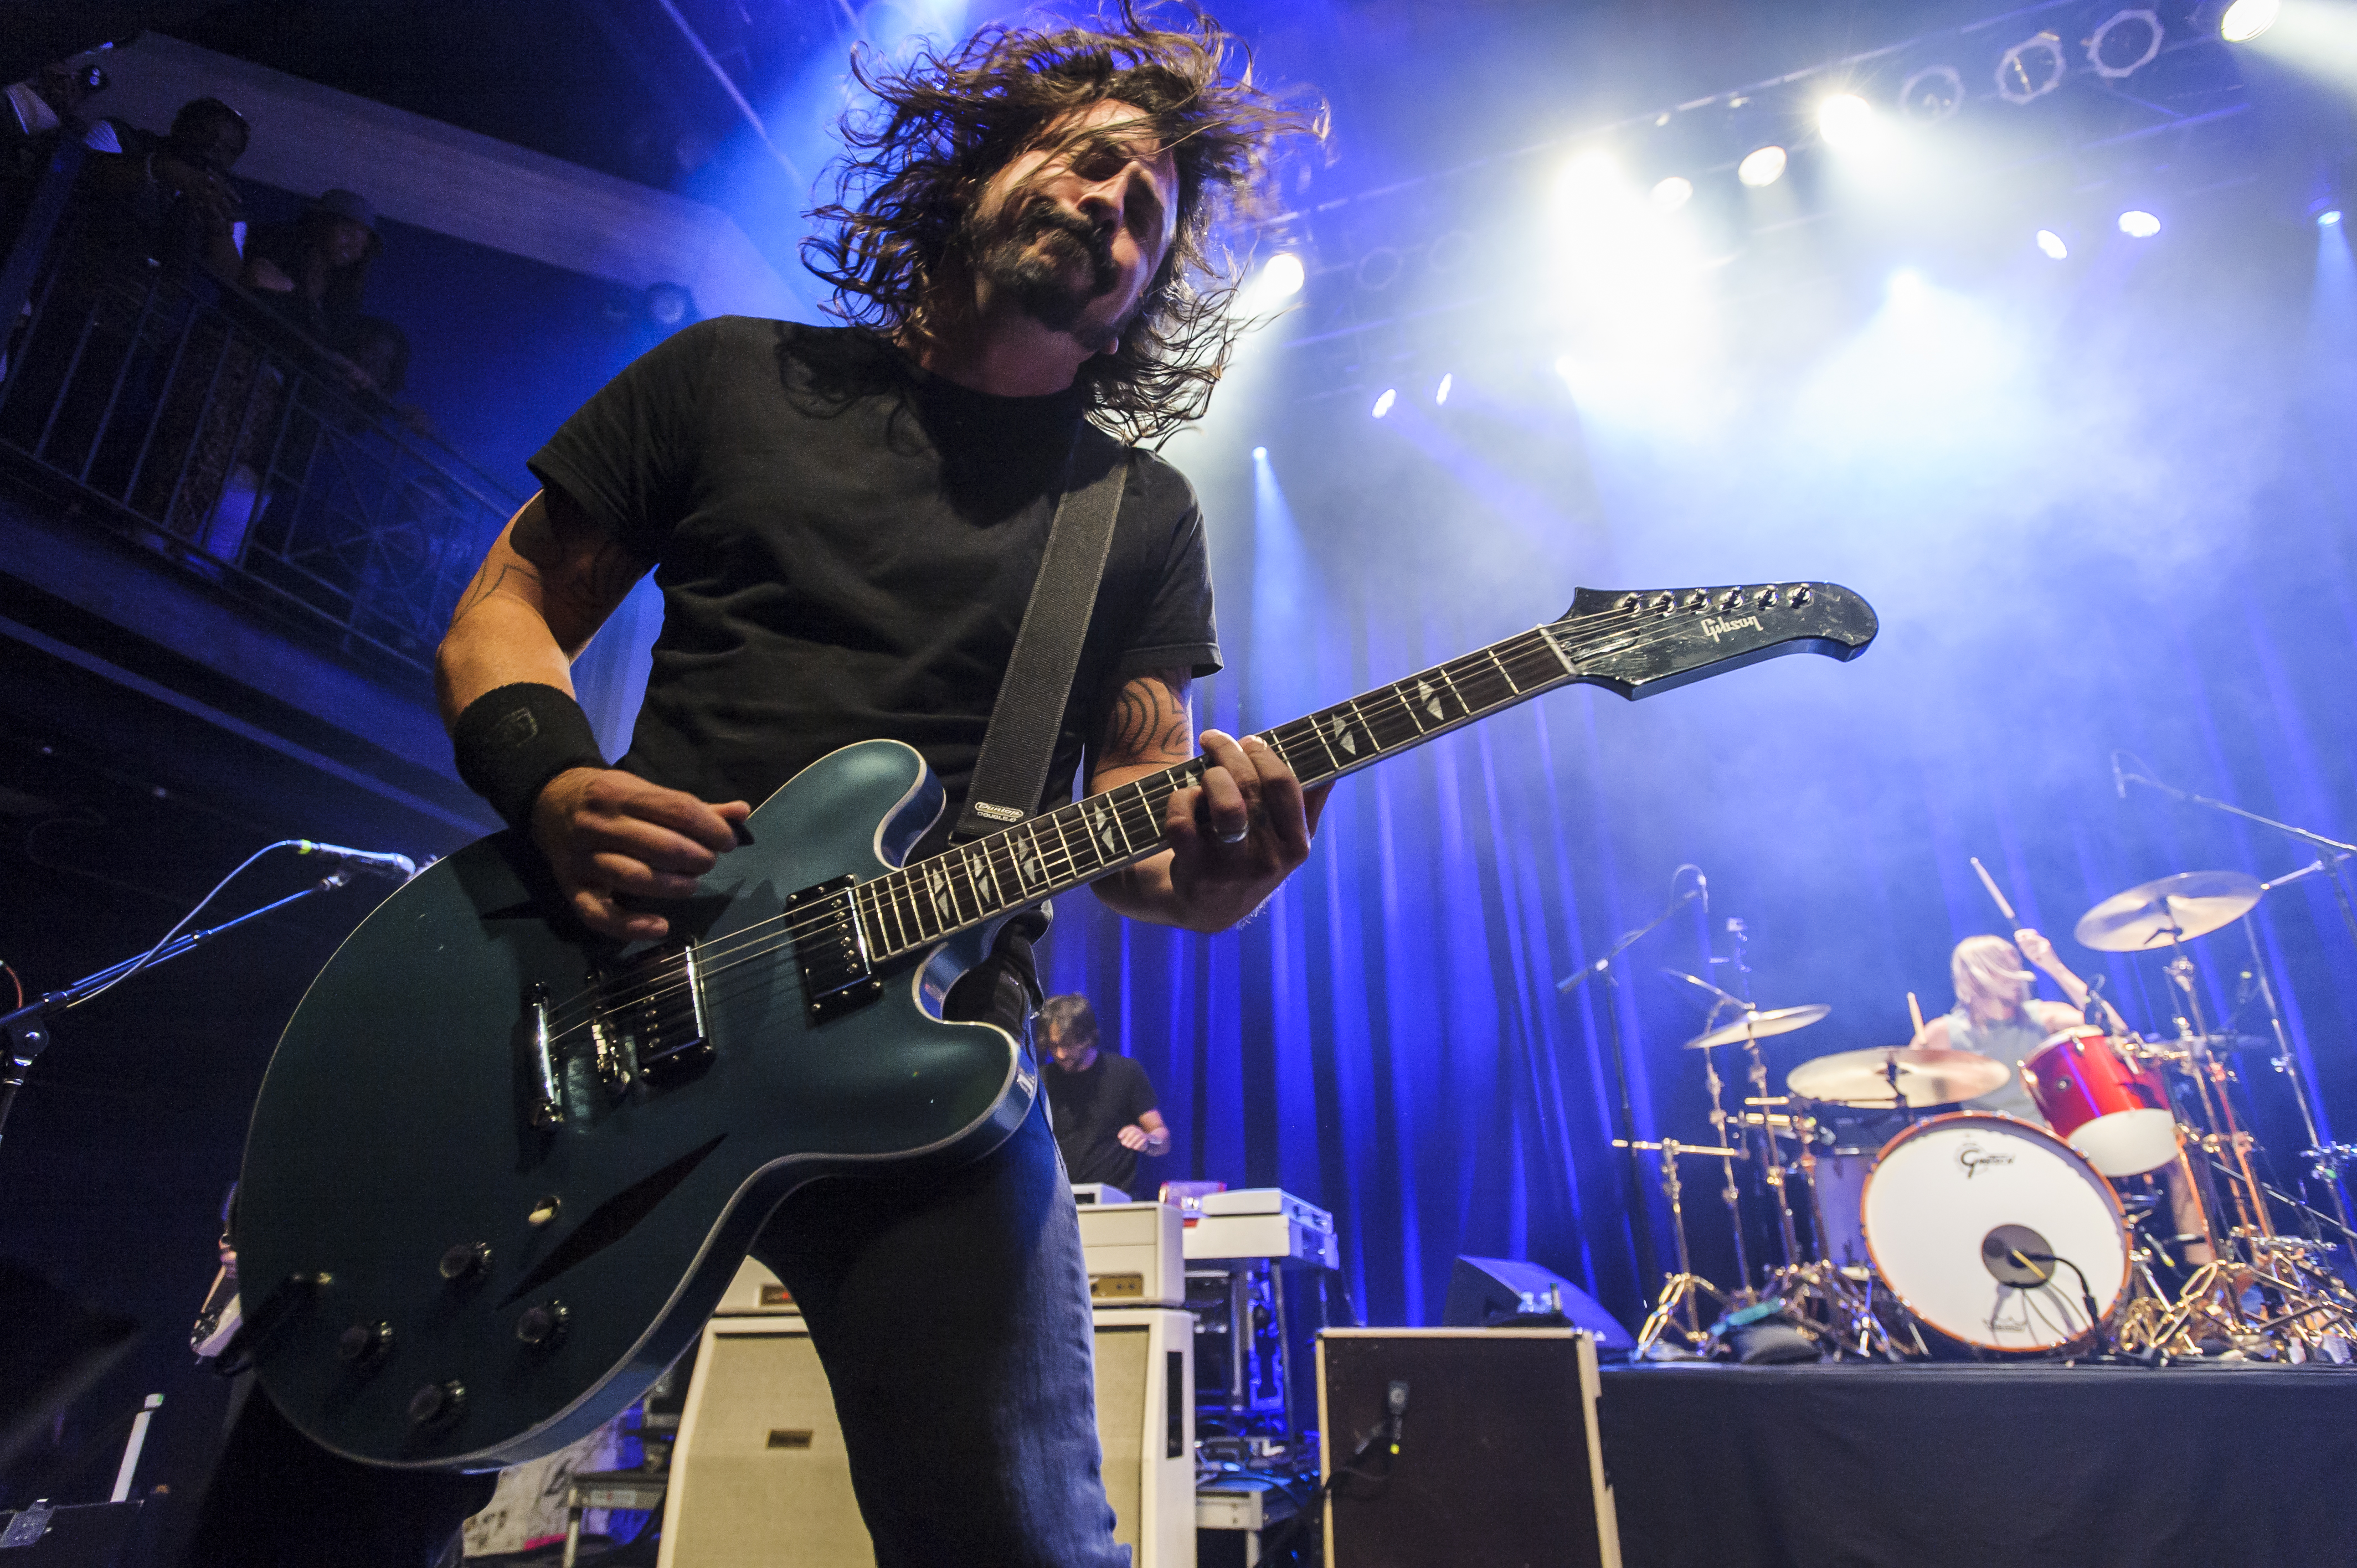 Dave Grohl of the Foo Fighters performs at the 9:30 Club in Washington D.C. as part of the birthday celebration for Big Tony of Trouble Funk. (Kyle Gustafson&mdash;The Washington Post/Getty Images)